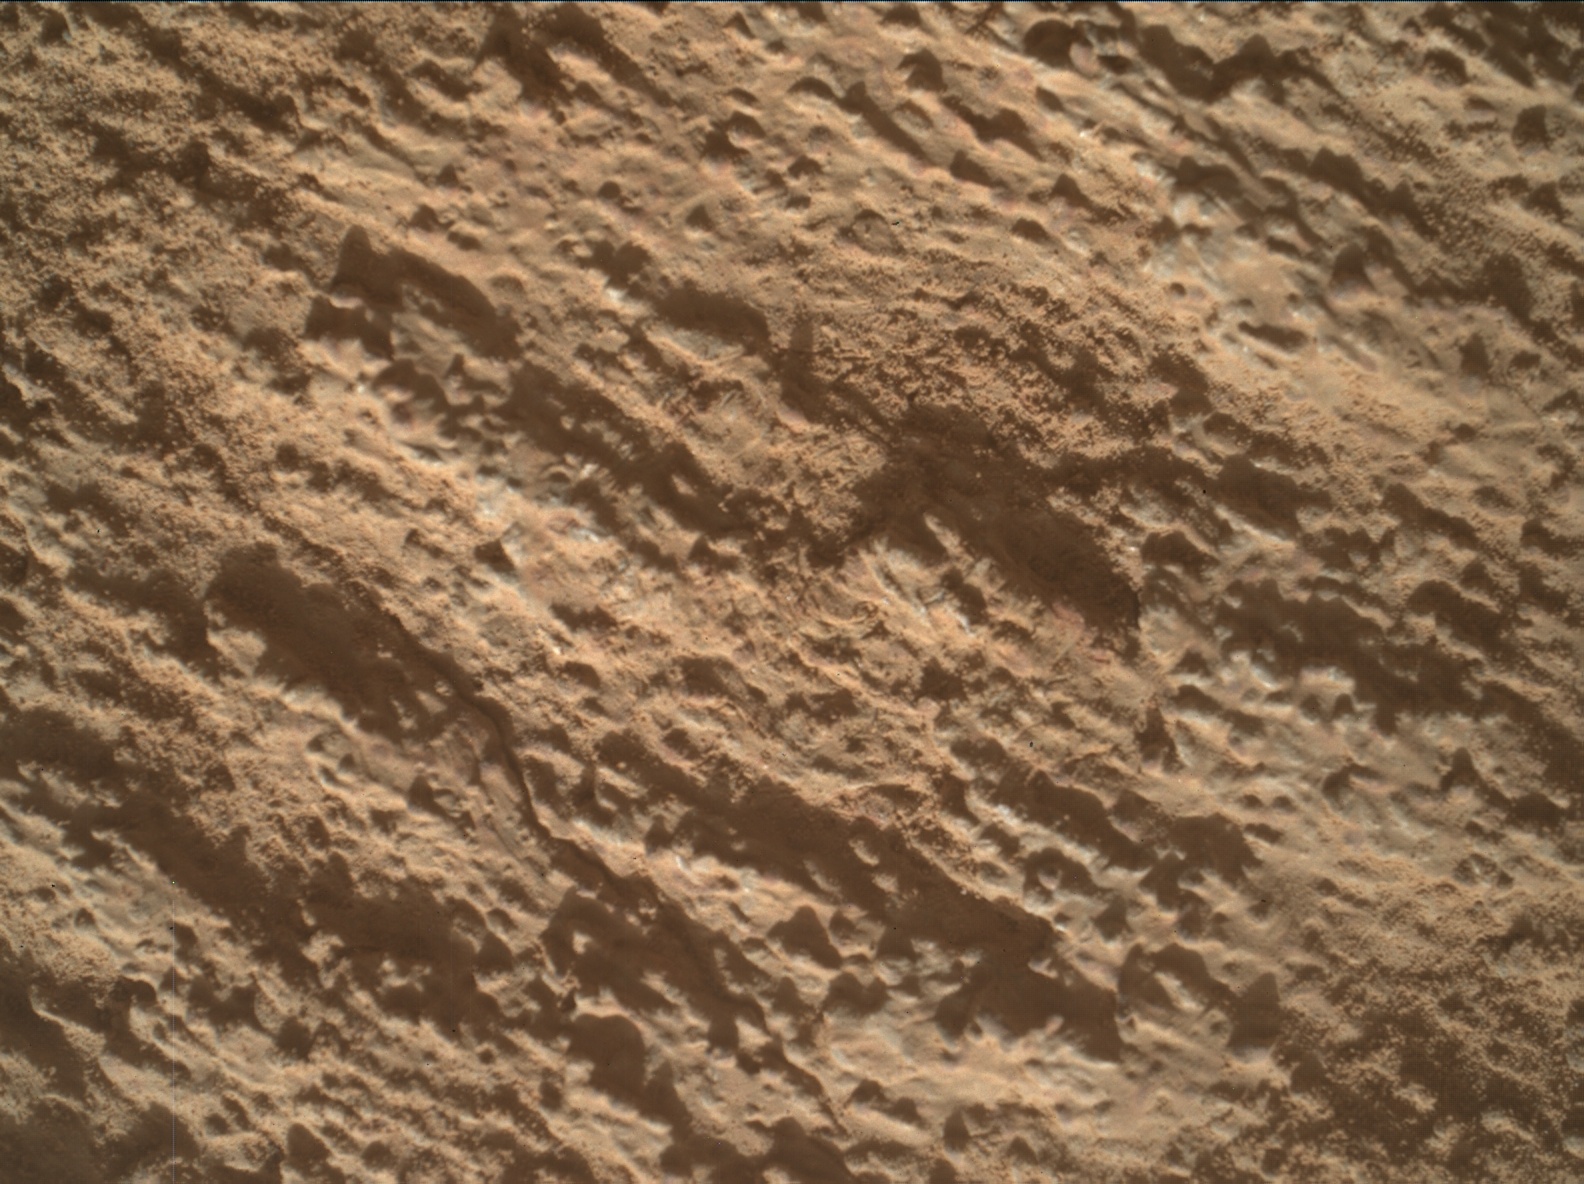 Nasa's Mars rover Curiosity acquired this image using its Mars Hand Lens Imager (MAHLI) on Sol 3214